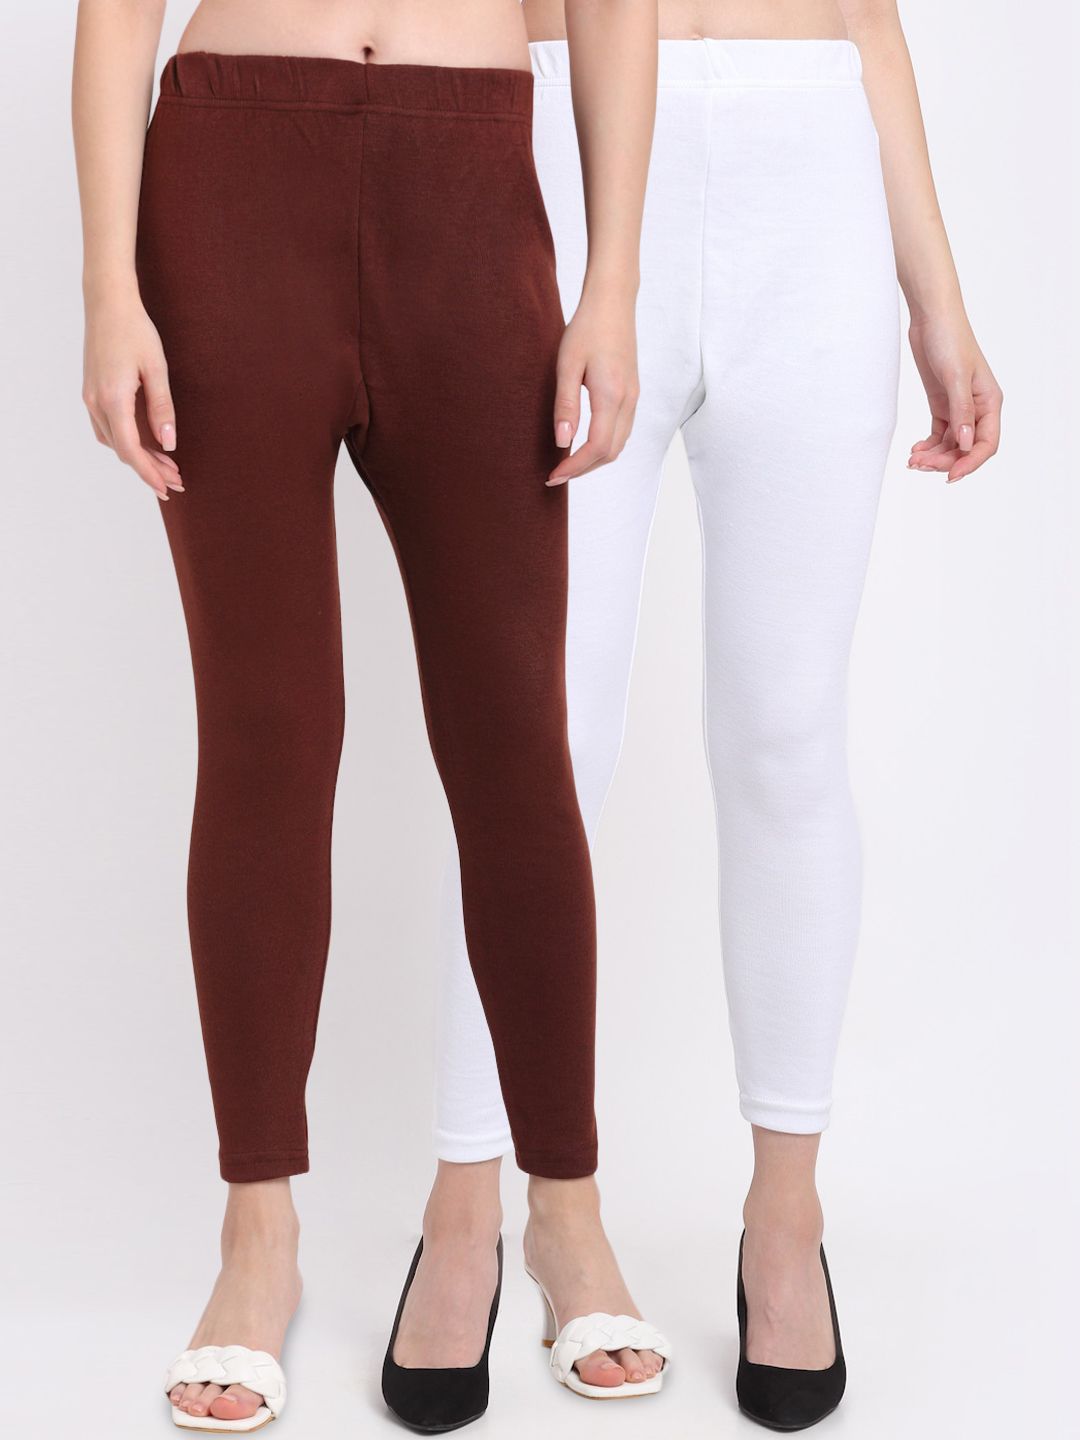 TAG 7 Women Pack Of 2 Brown & White Solid Ankle-Length Leggings Price in India